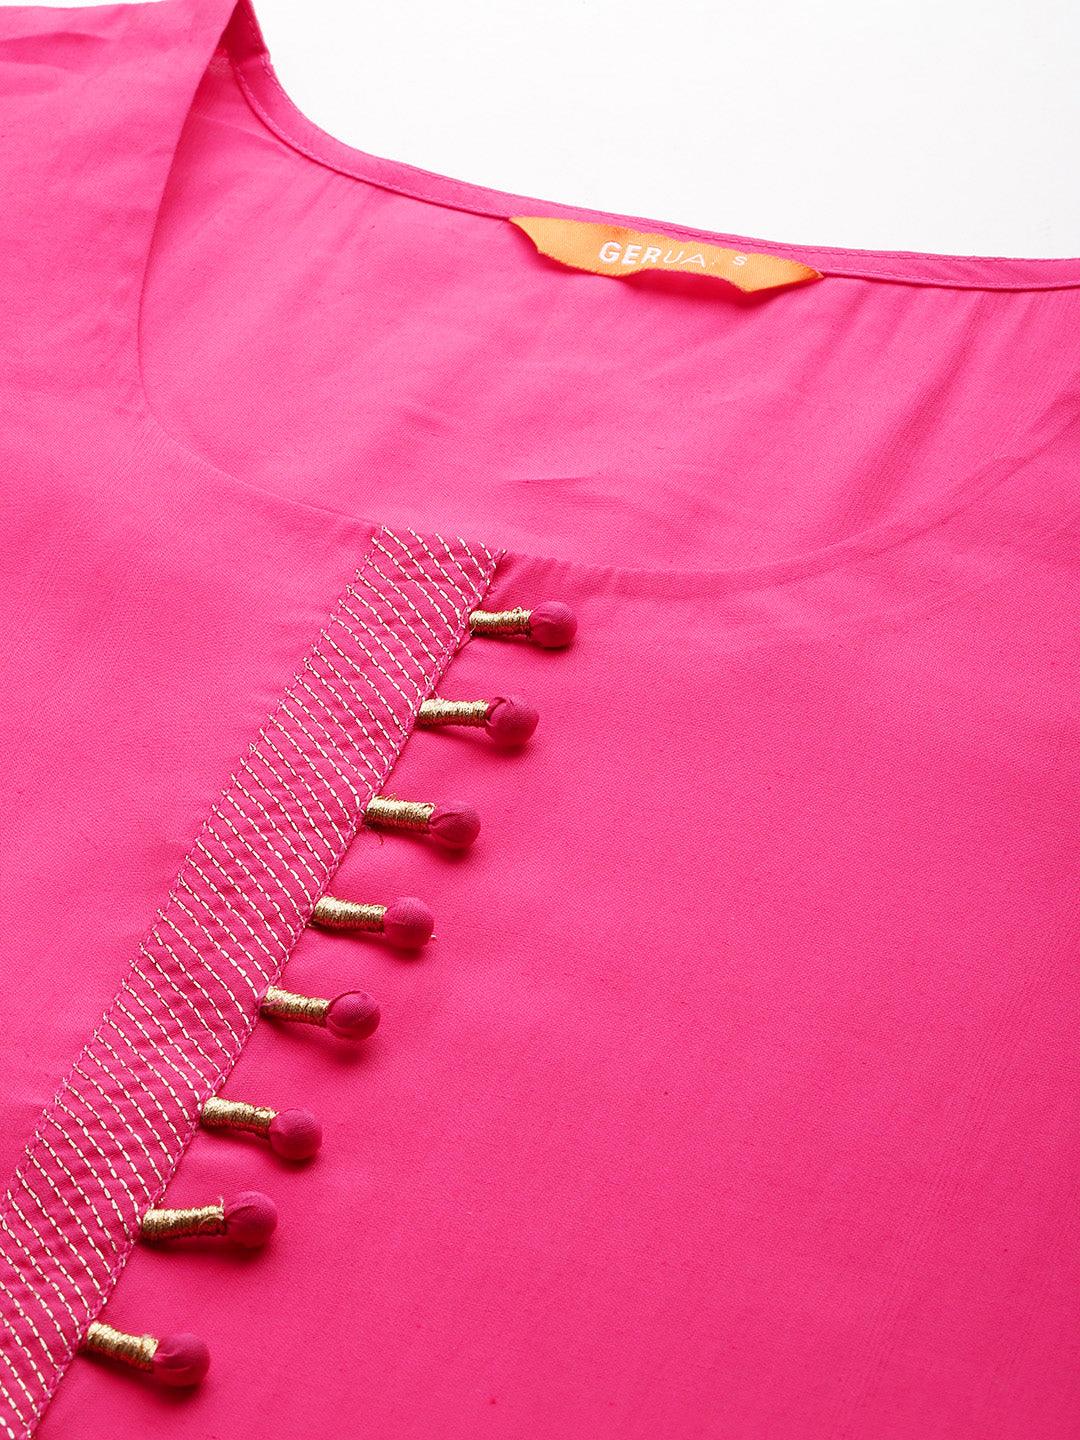 Pink Solid Silk Blend Straight Suit With Dupatta